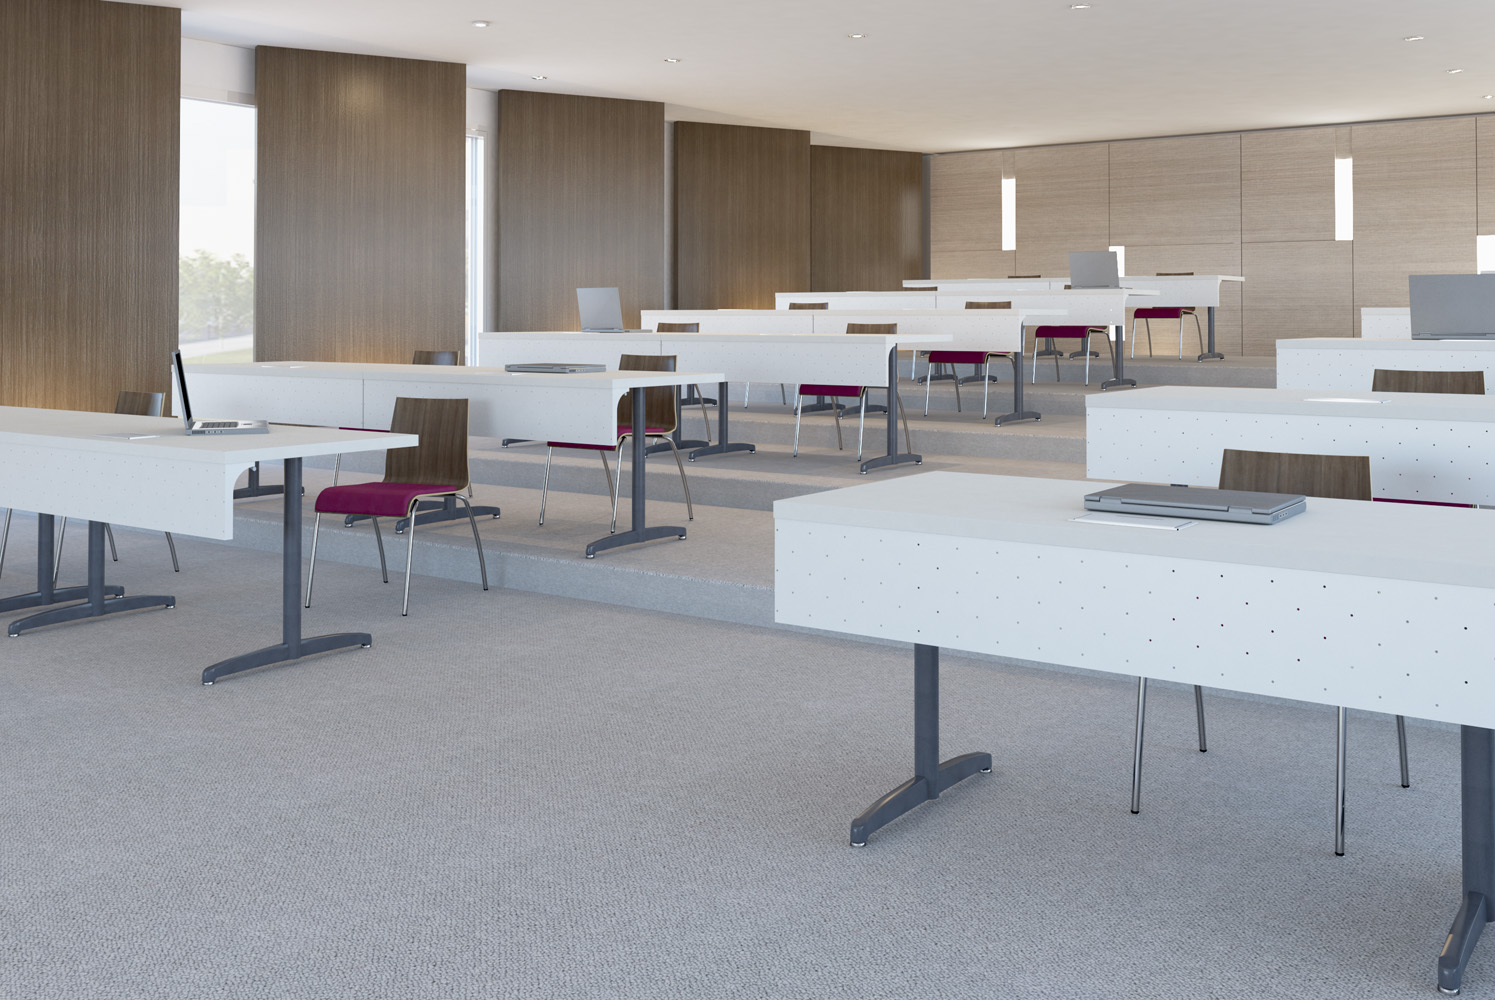 Meeting Room Configuration, Crossfire with Modesty Panel, Pento Chairs